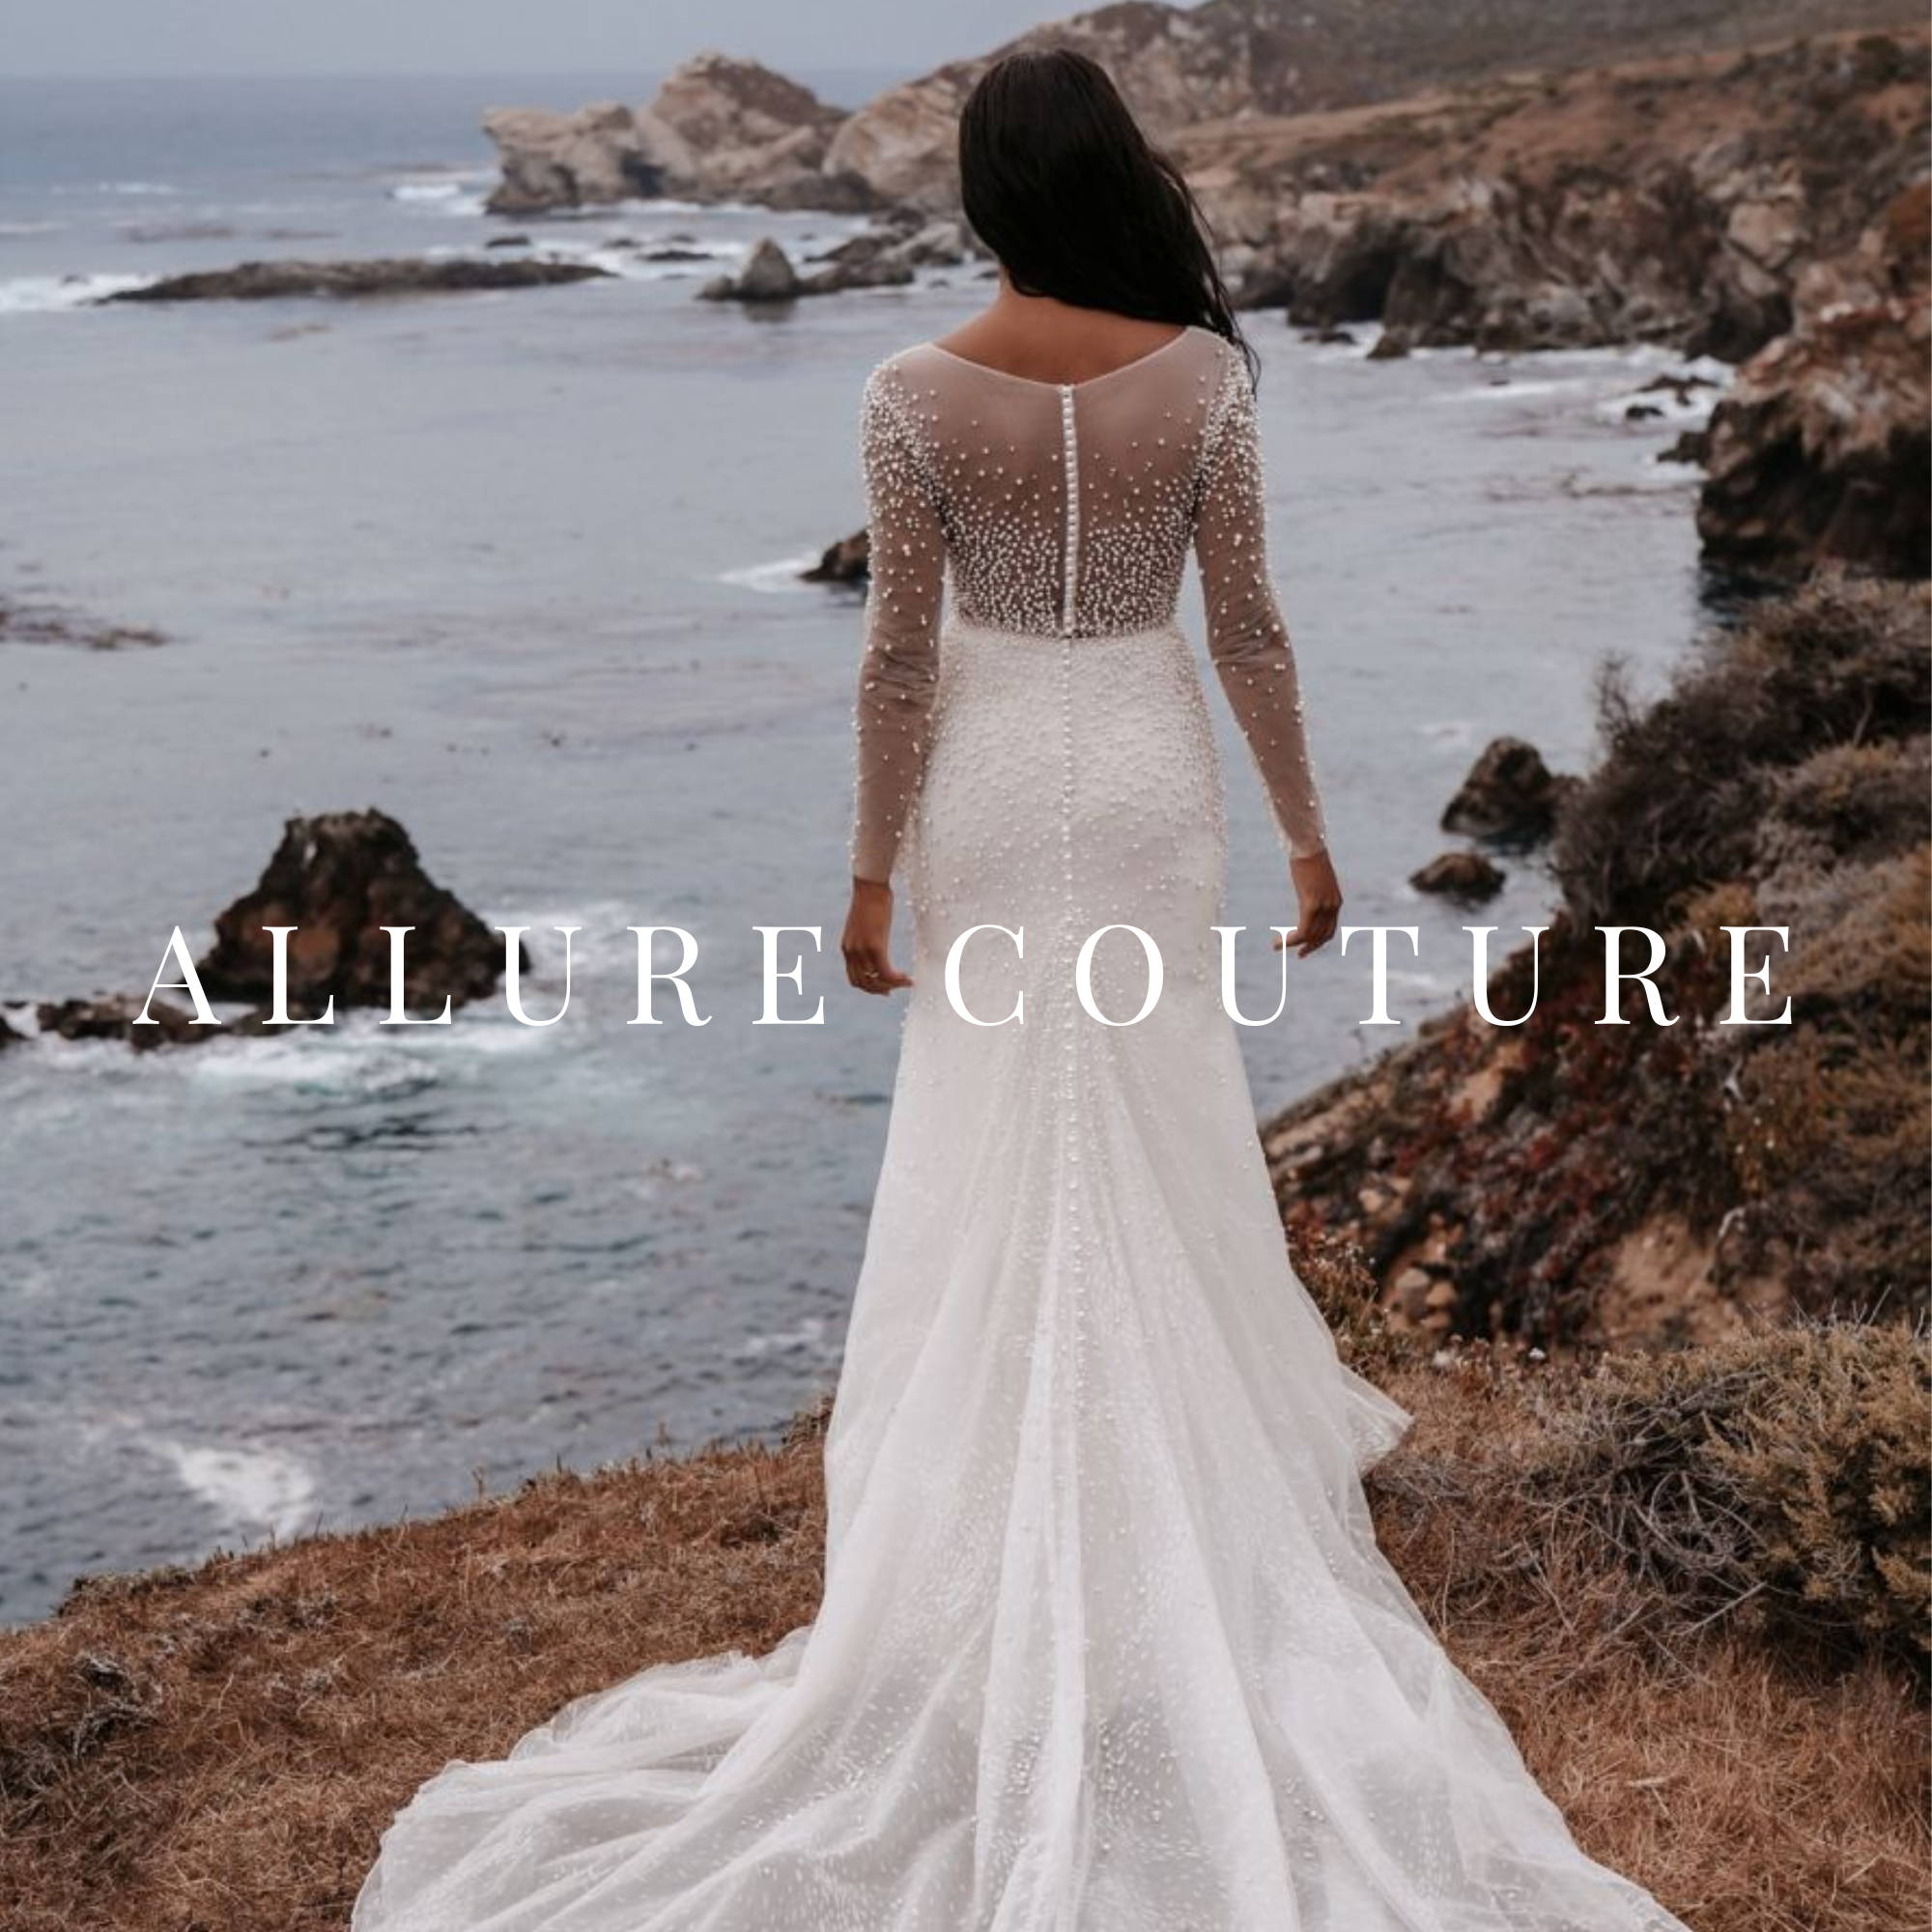 ALLURE COUTURE WEDDING DRESS